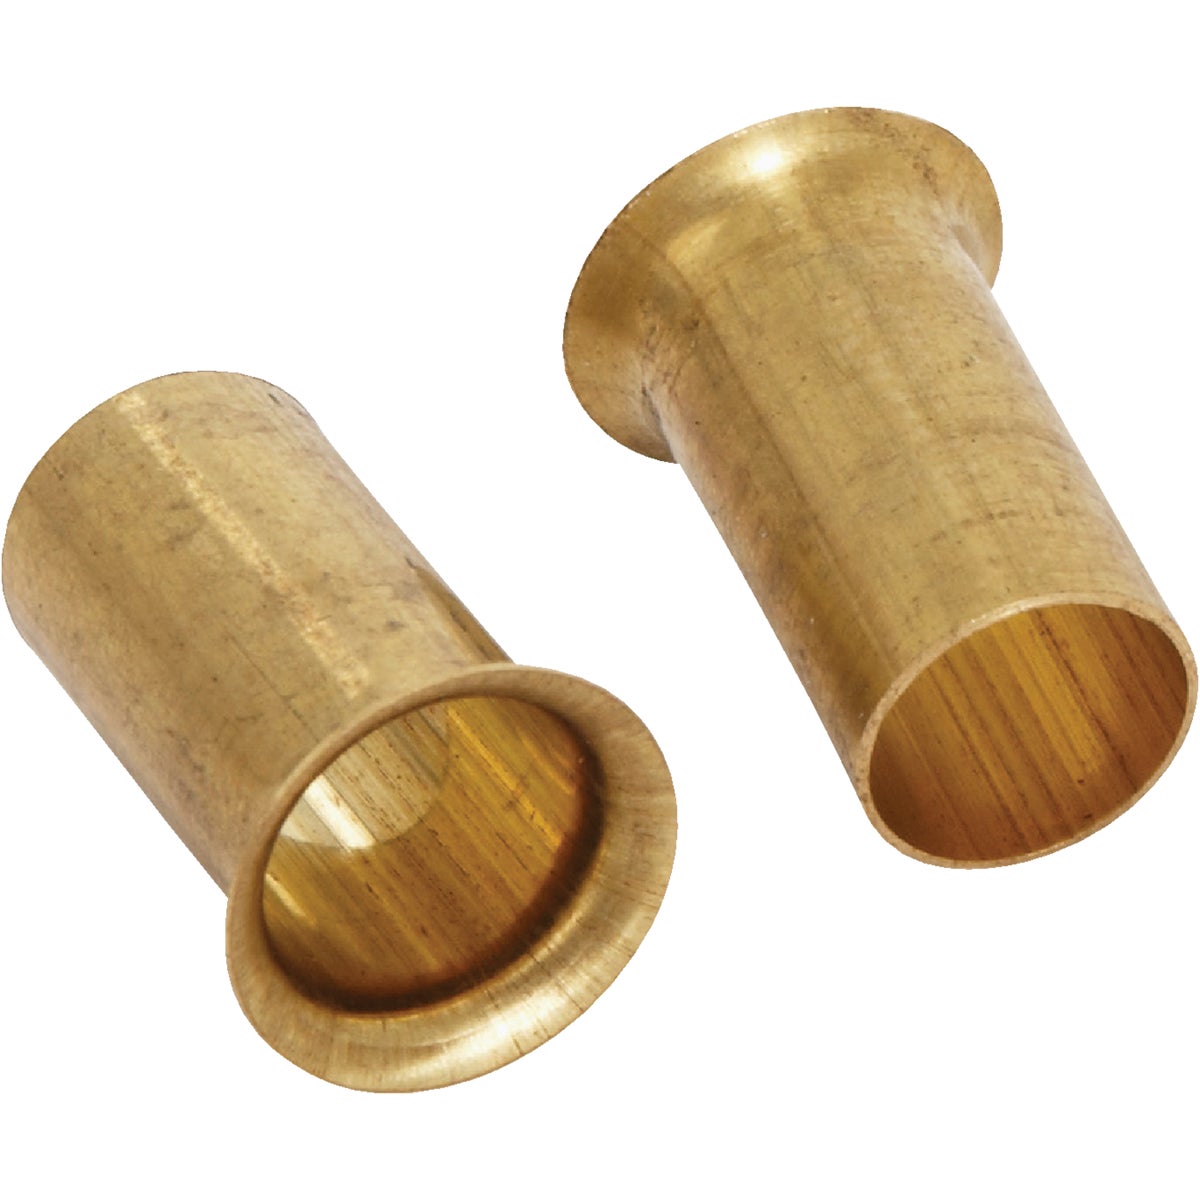 Do it 3/8 In. Brass Compression Insert (2-Pack)